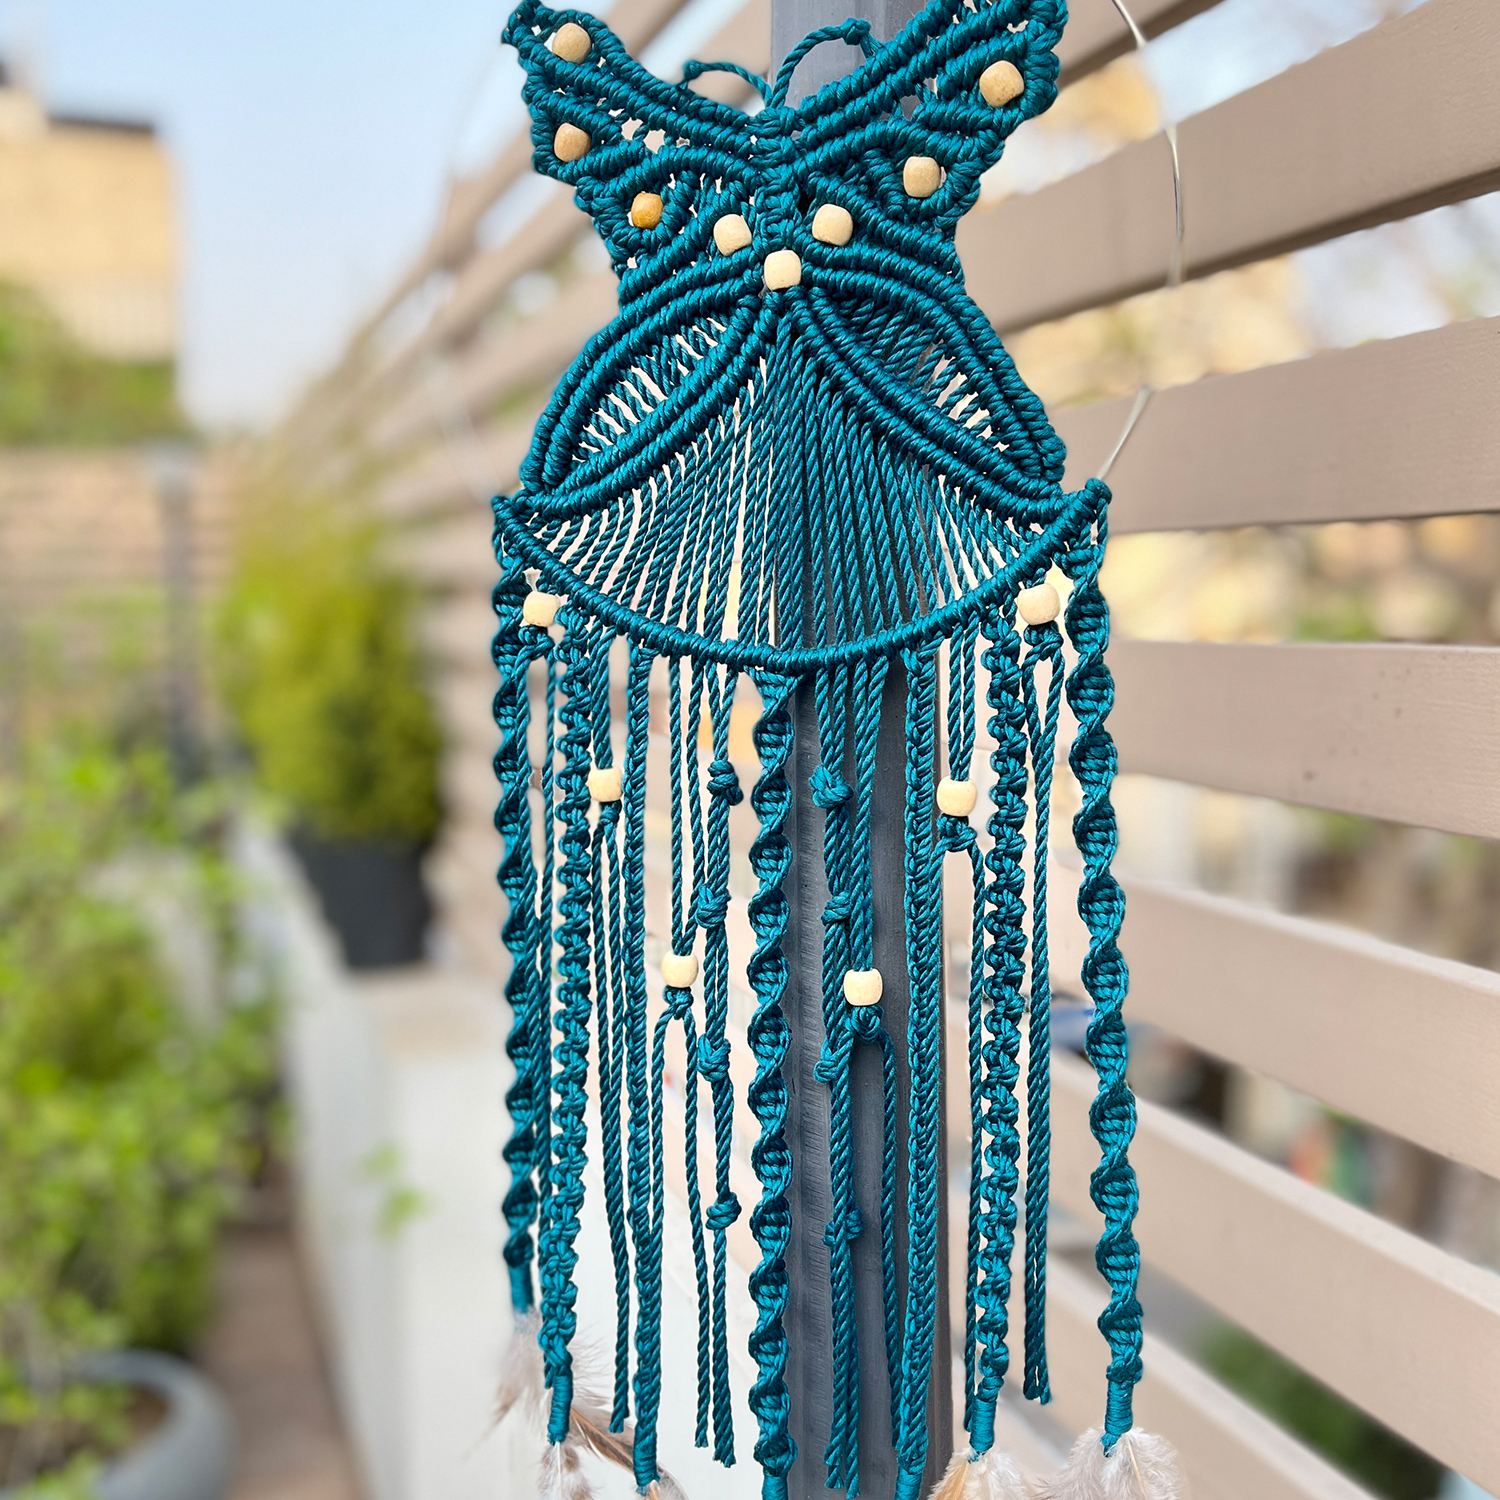 Teal Blue Macrame Wall Hanging With Feathers on Edge